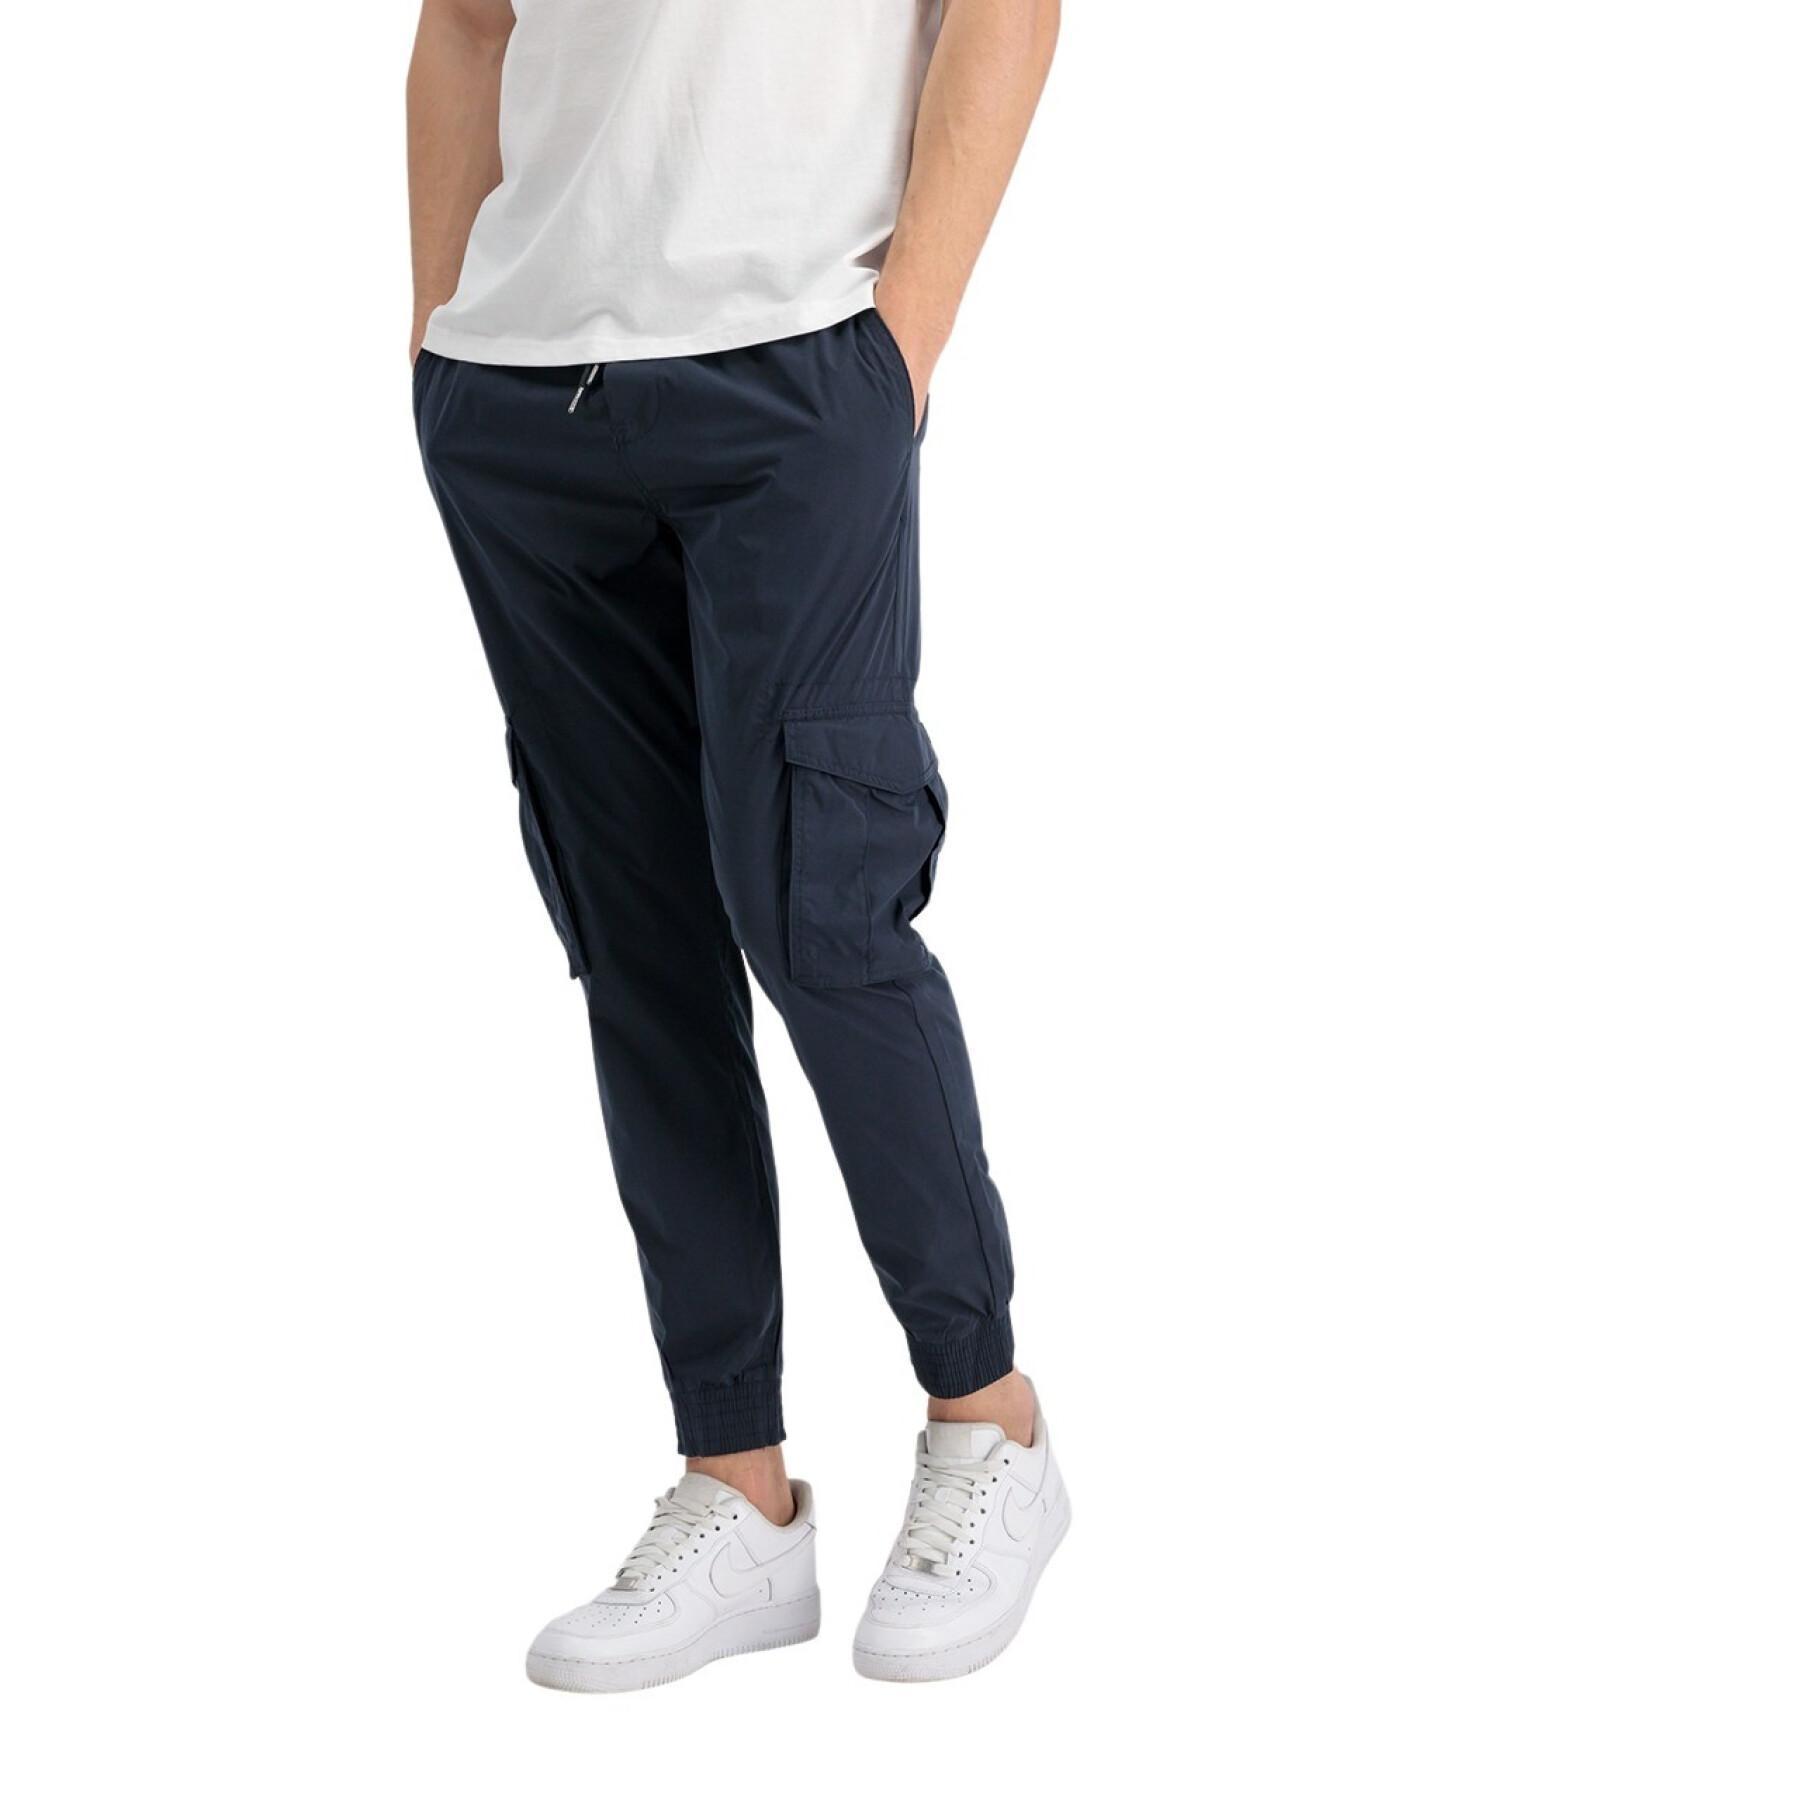 Pants cargo nylon and Men - Jogging - Industries - Alpha Clothing Trousers